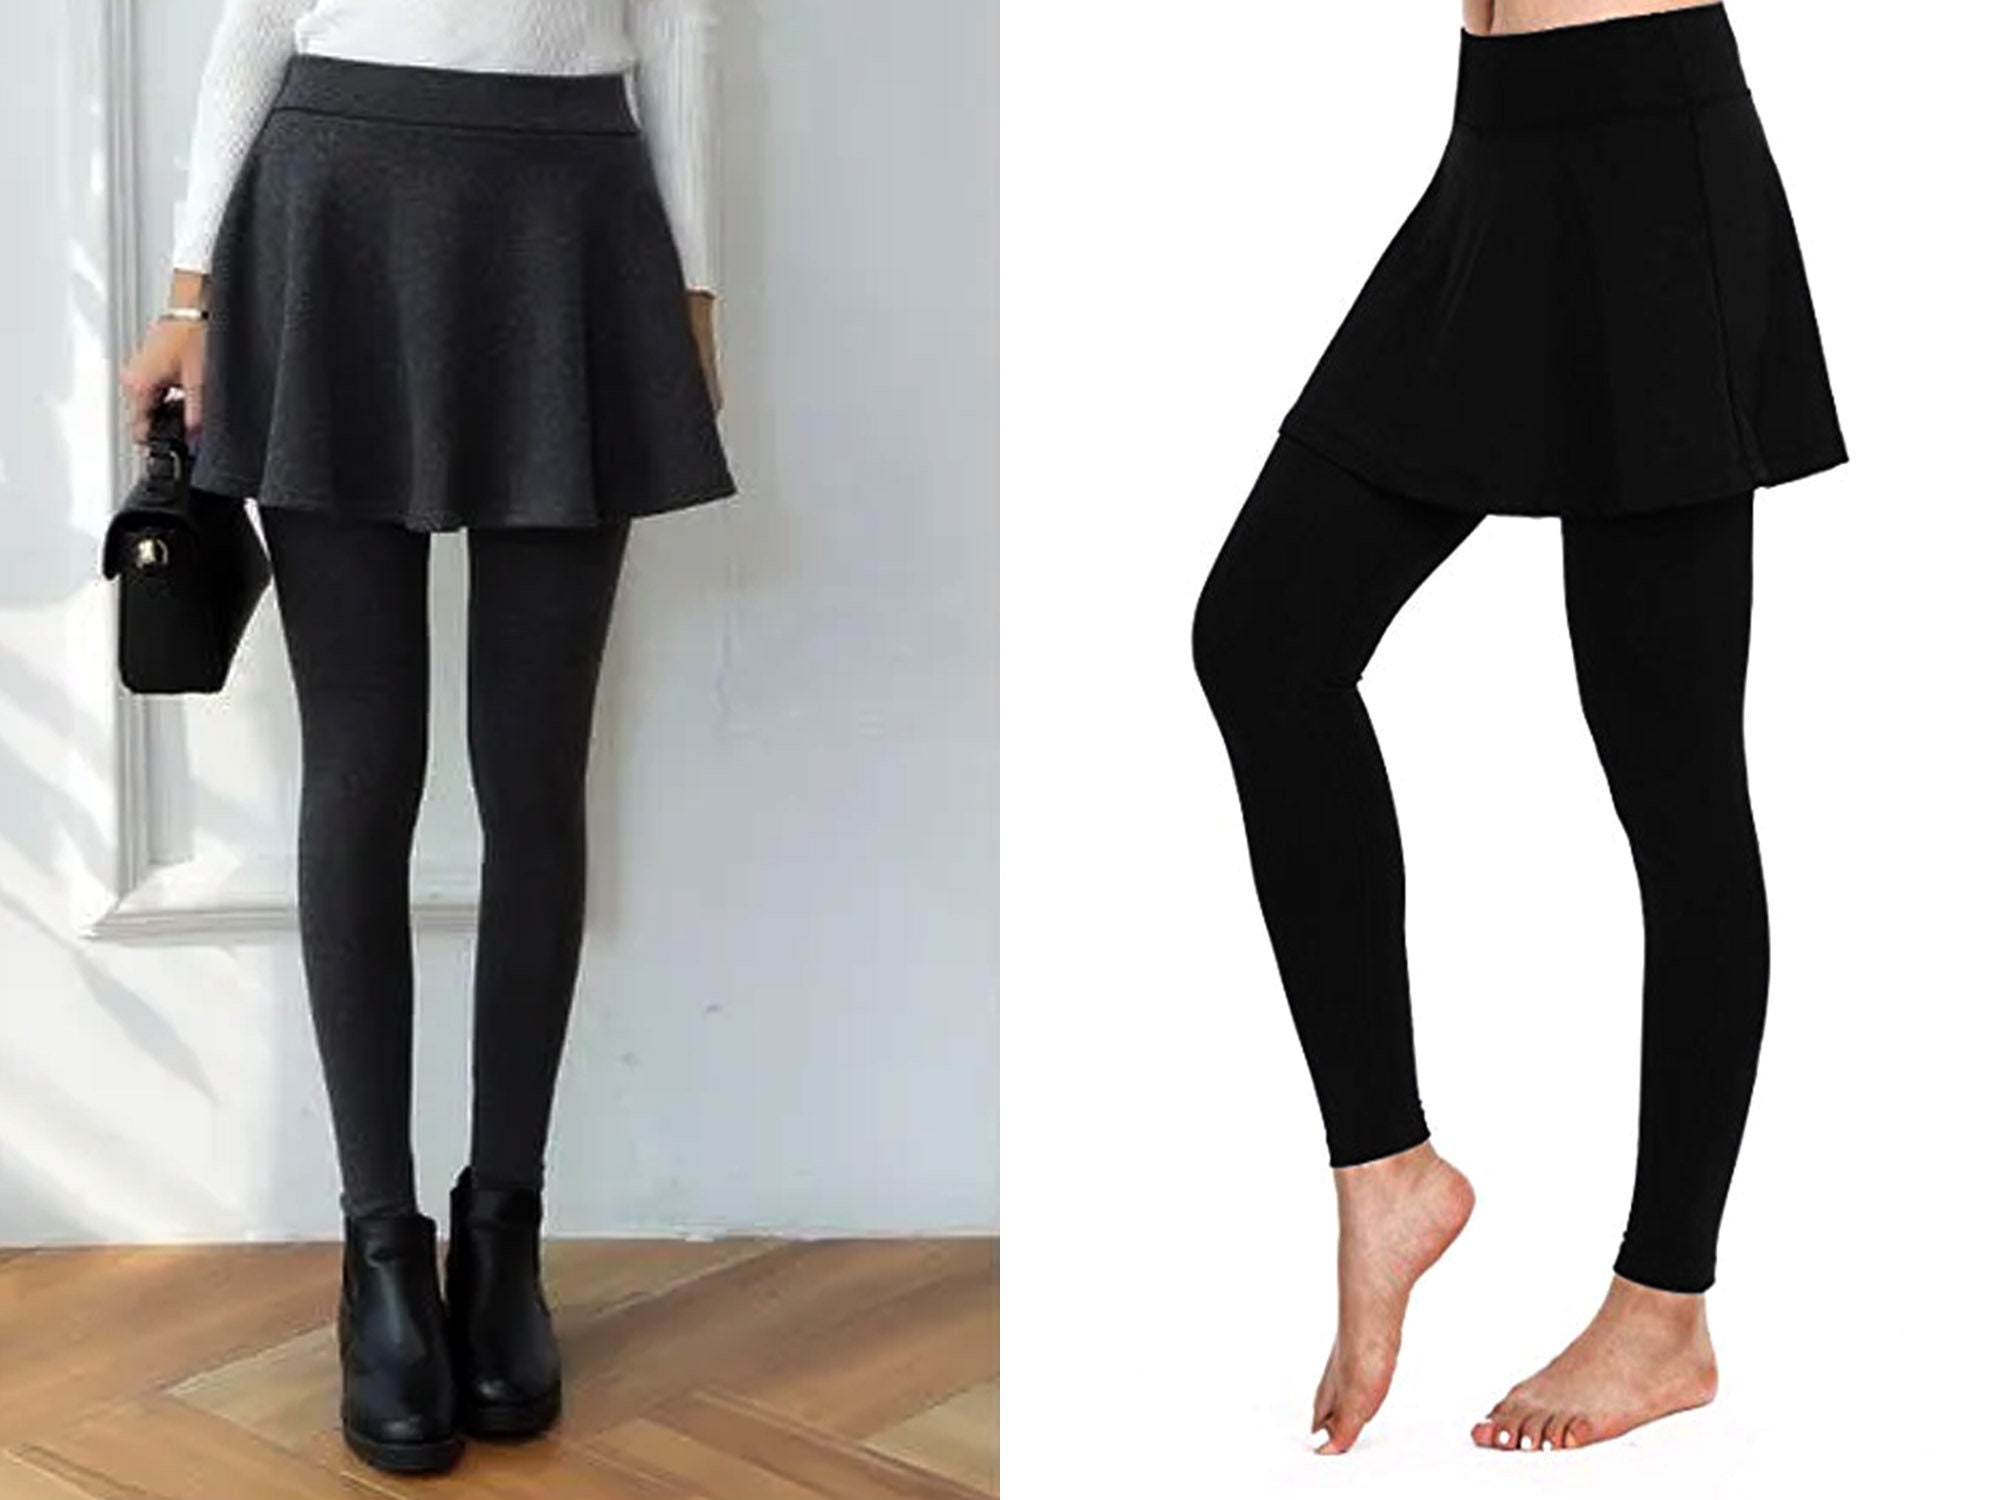 Black Leggings with Skirt, Fitted Stretch Pants, Yoga Pants with Attached  Skirt, Athleisure, Burke Skirted Leggings, Marcella - MP1868